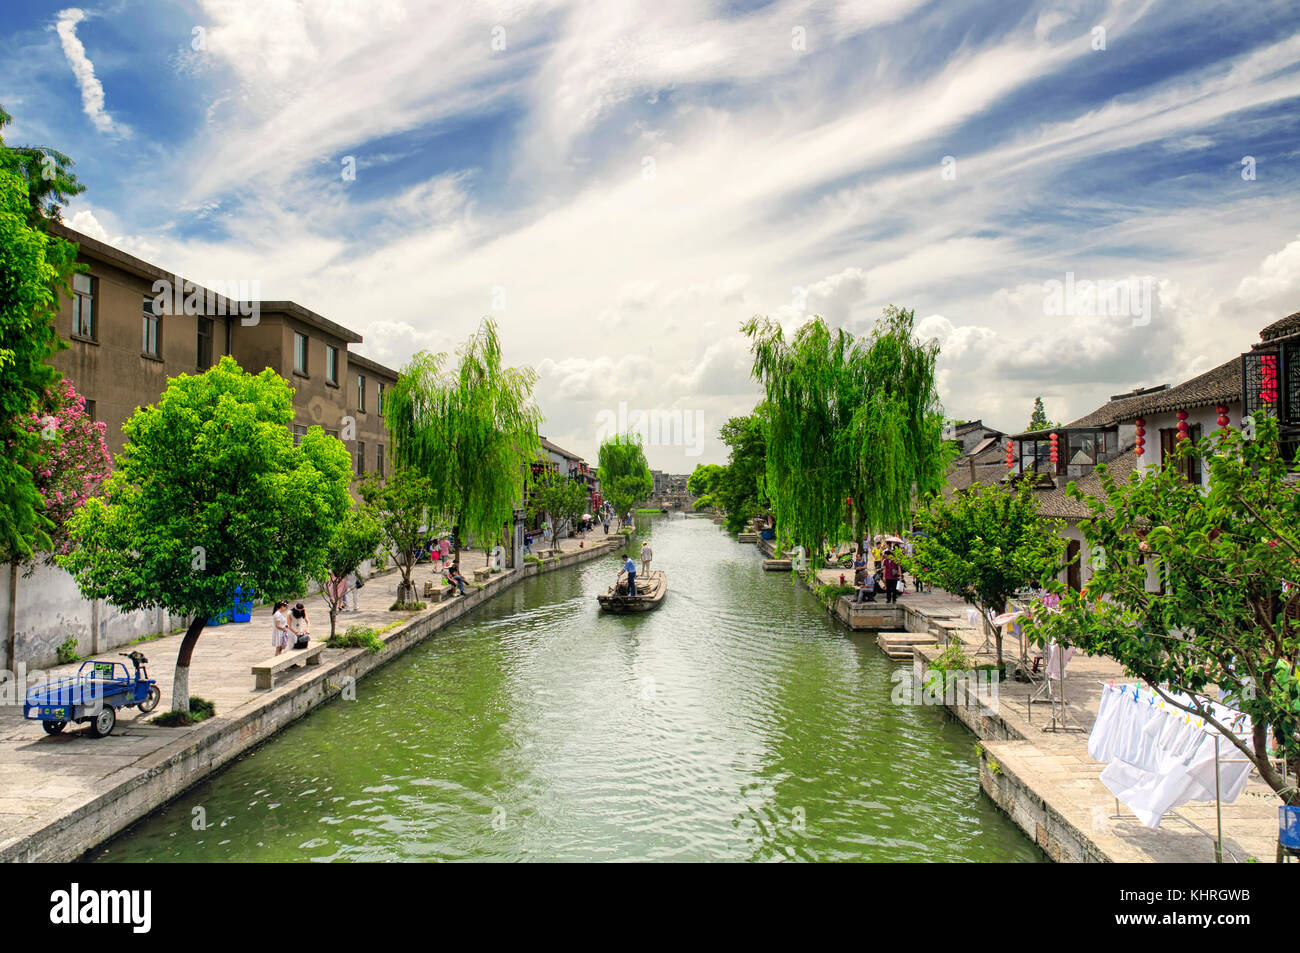 August 8, 2015.  Xitang Town, China. Chinese style buildings and tourist boats on the water canals of Xitang town in Jiashan county in Zhejiang provin Stock Photo